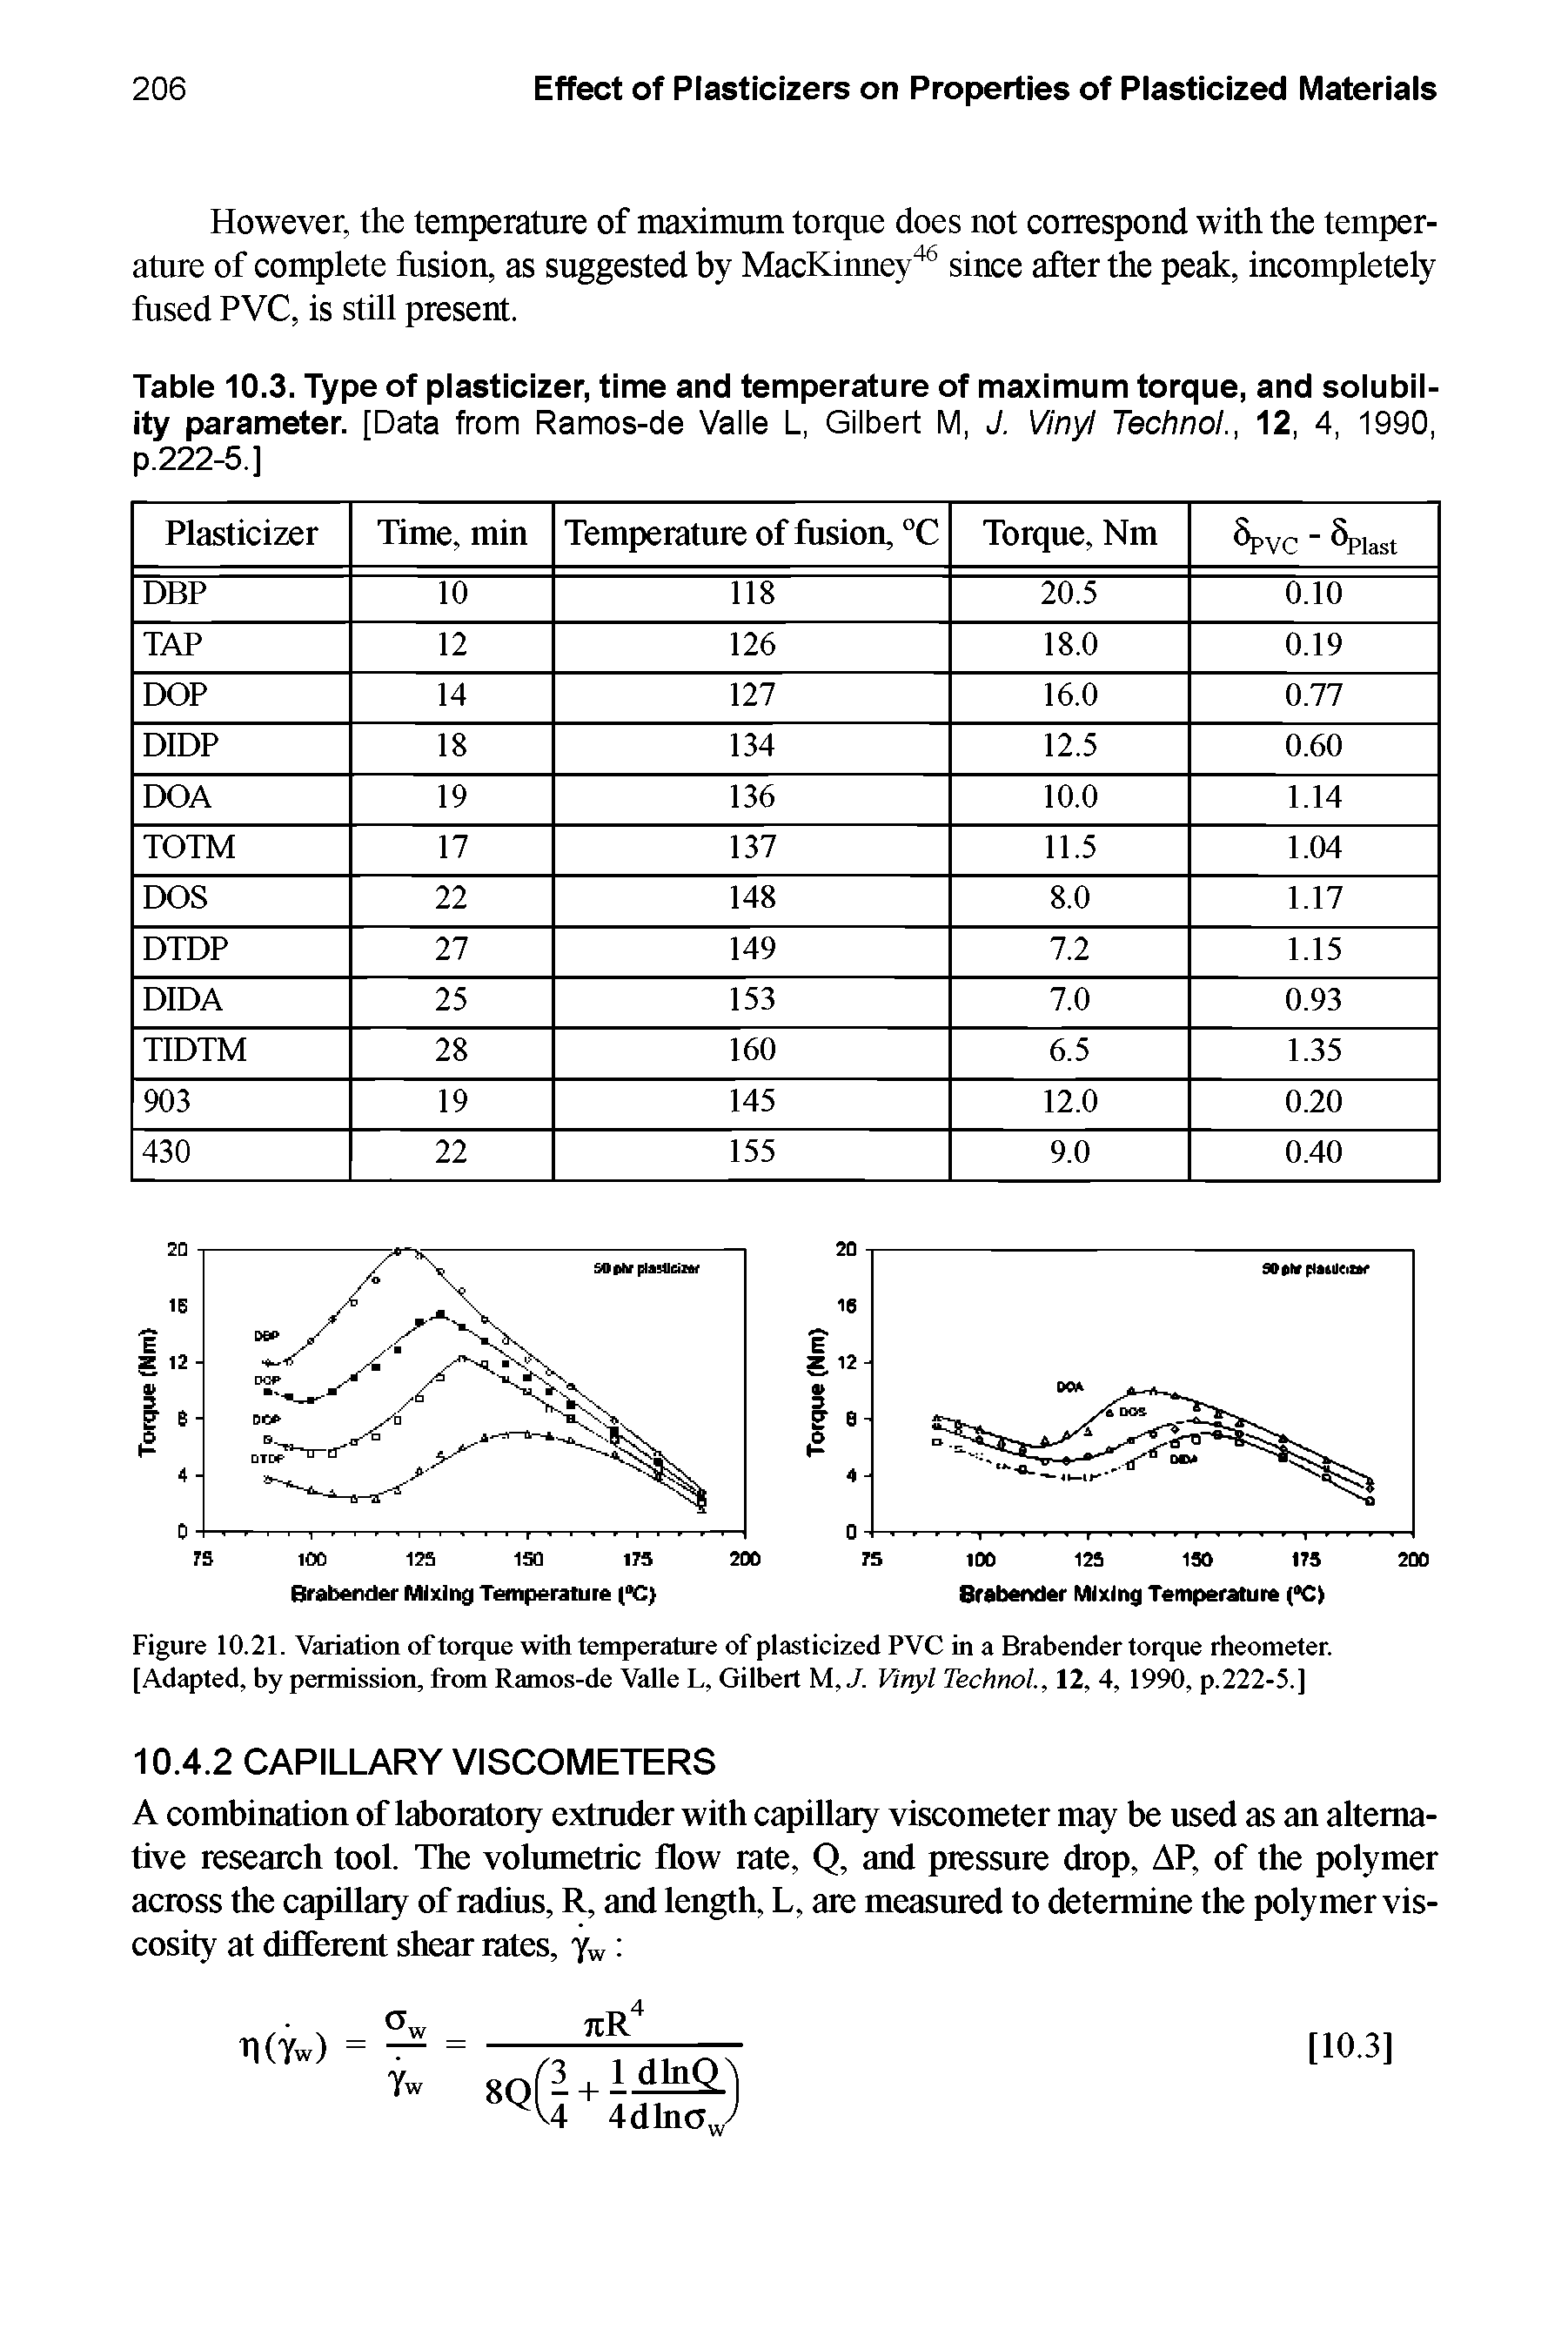 Figure 10.21. Variation of torque with temperature of plasticized PVC in a Brabender torque rheometer. [Adapted, by permission, from Ramos-de Valle L, Gilbert M,J. Vmyl Technol, 12, 4, 1990, p.222-5.]...